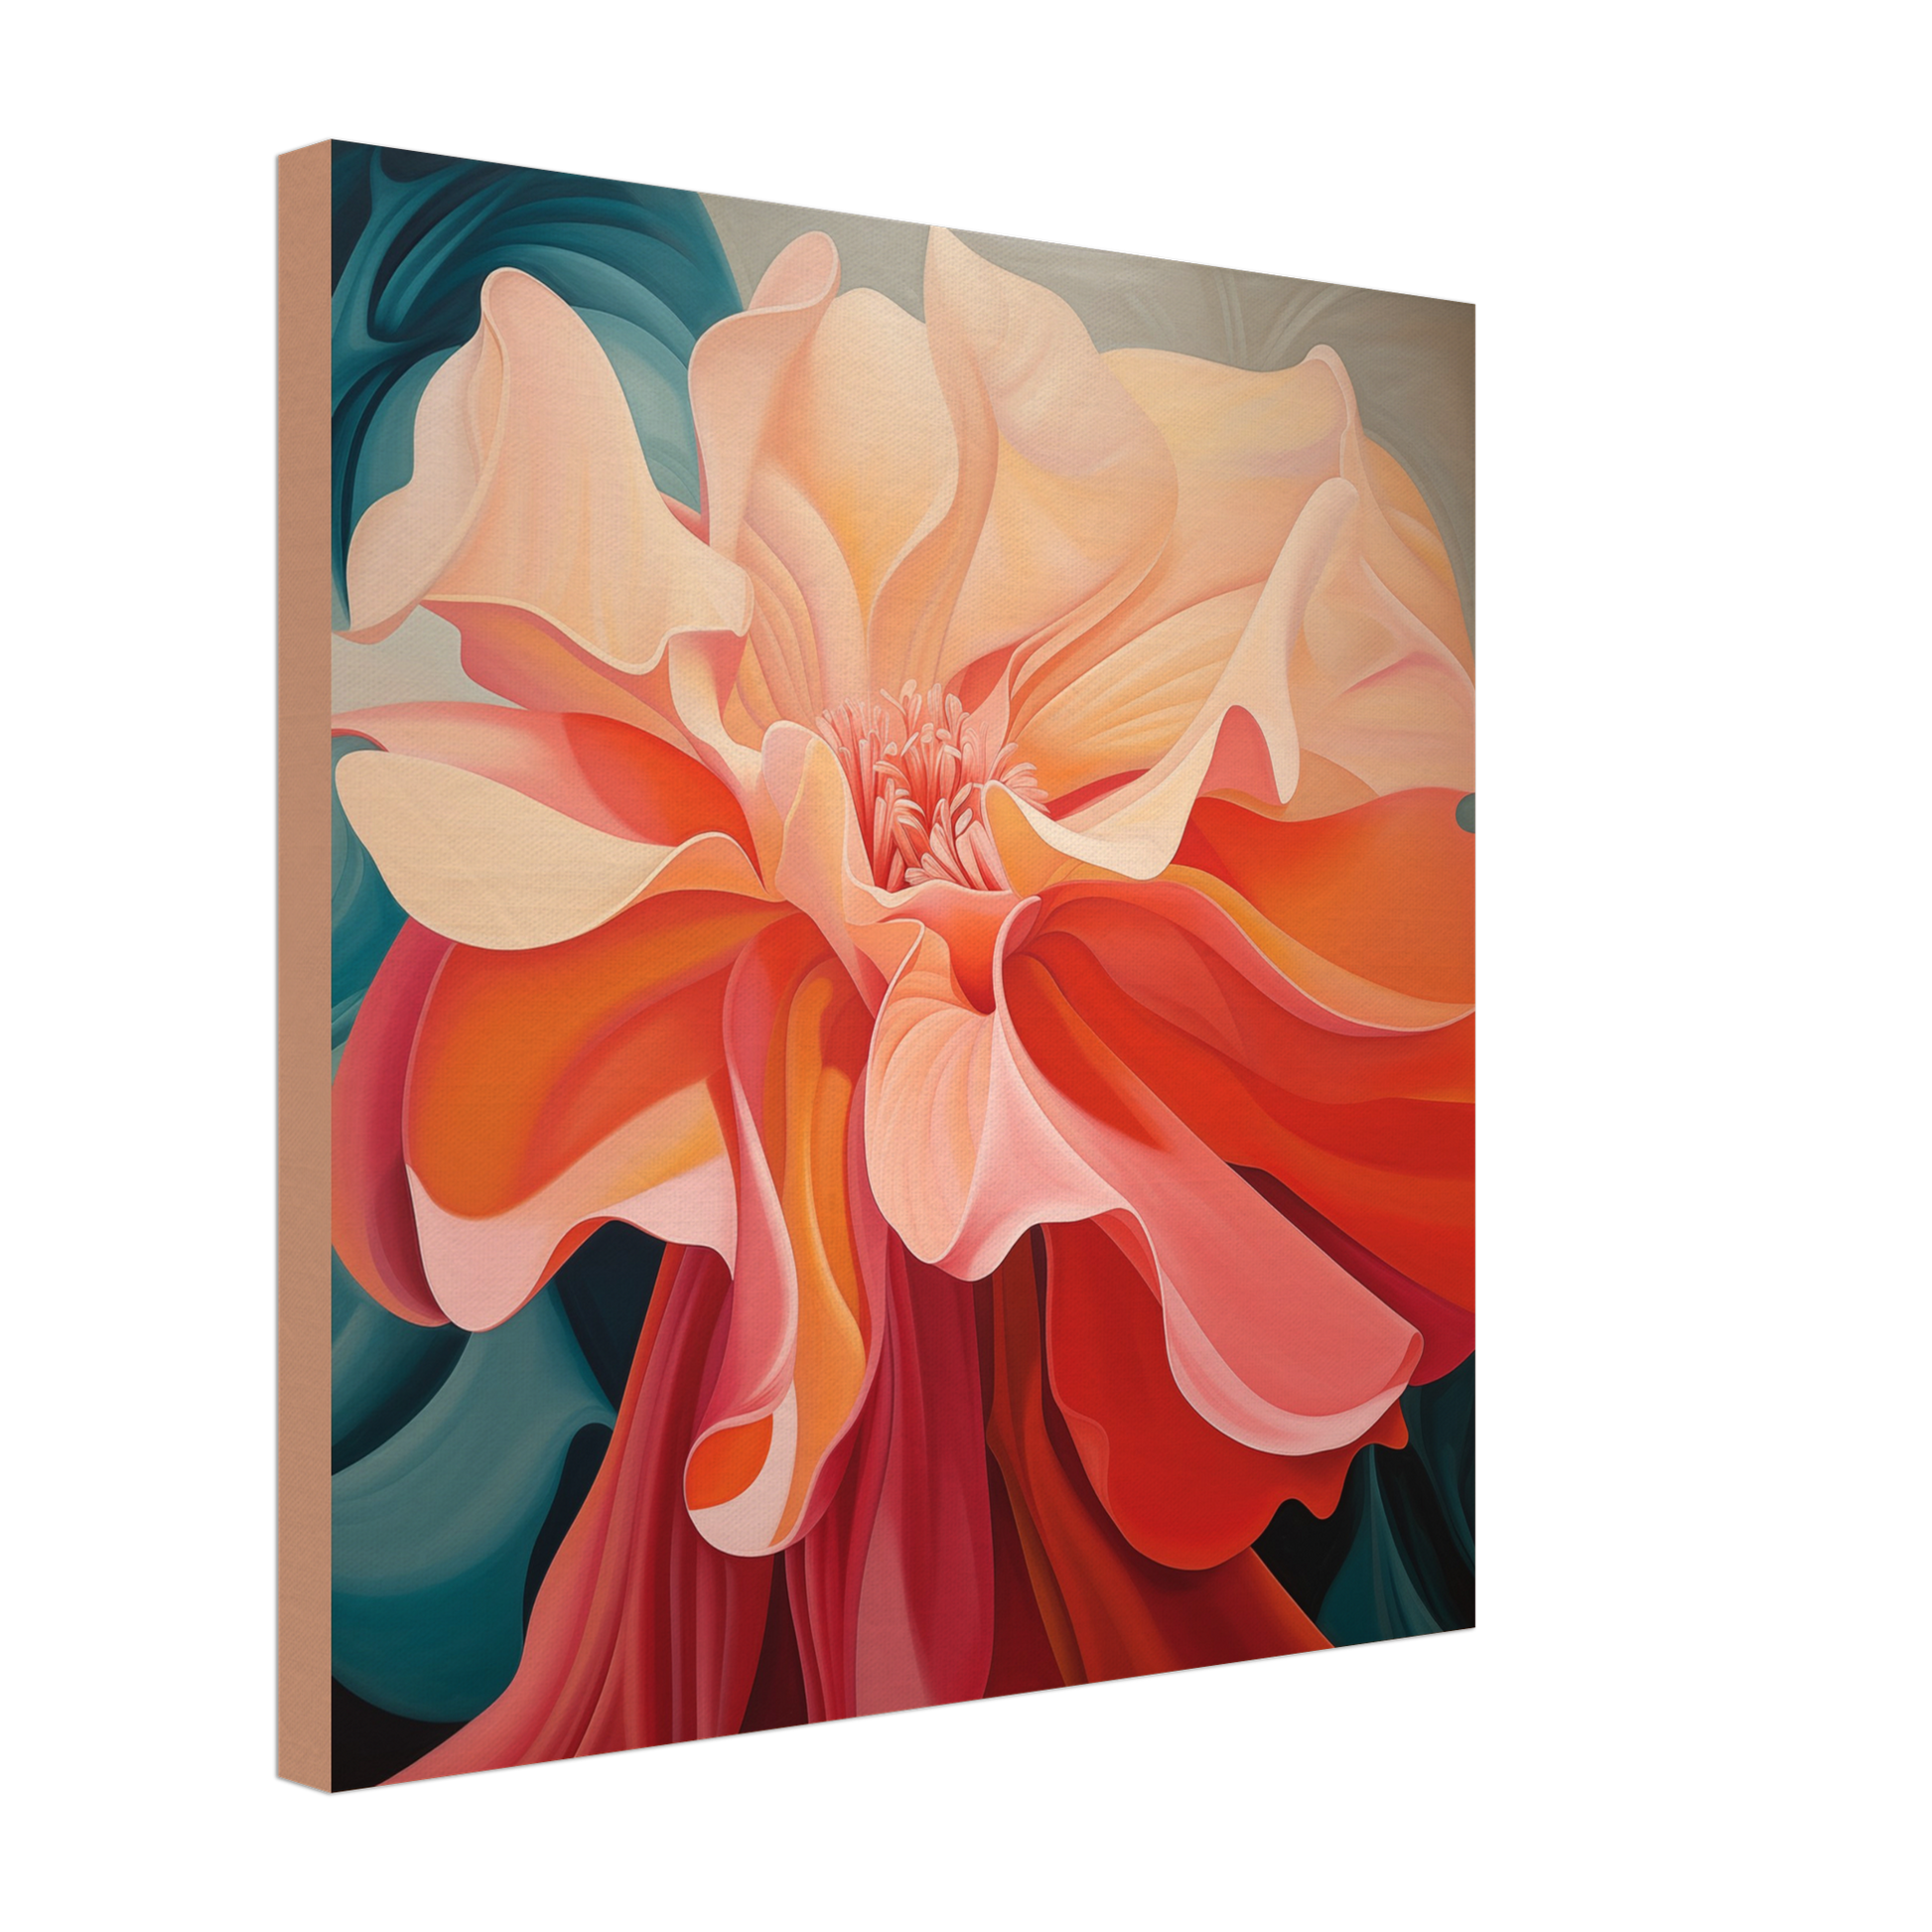 An abstract painting of The Wild In The Flower Inspired By Georgia O'Keefe on a wooden frame that ensures the image quality and color remain unaffected.